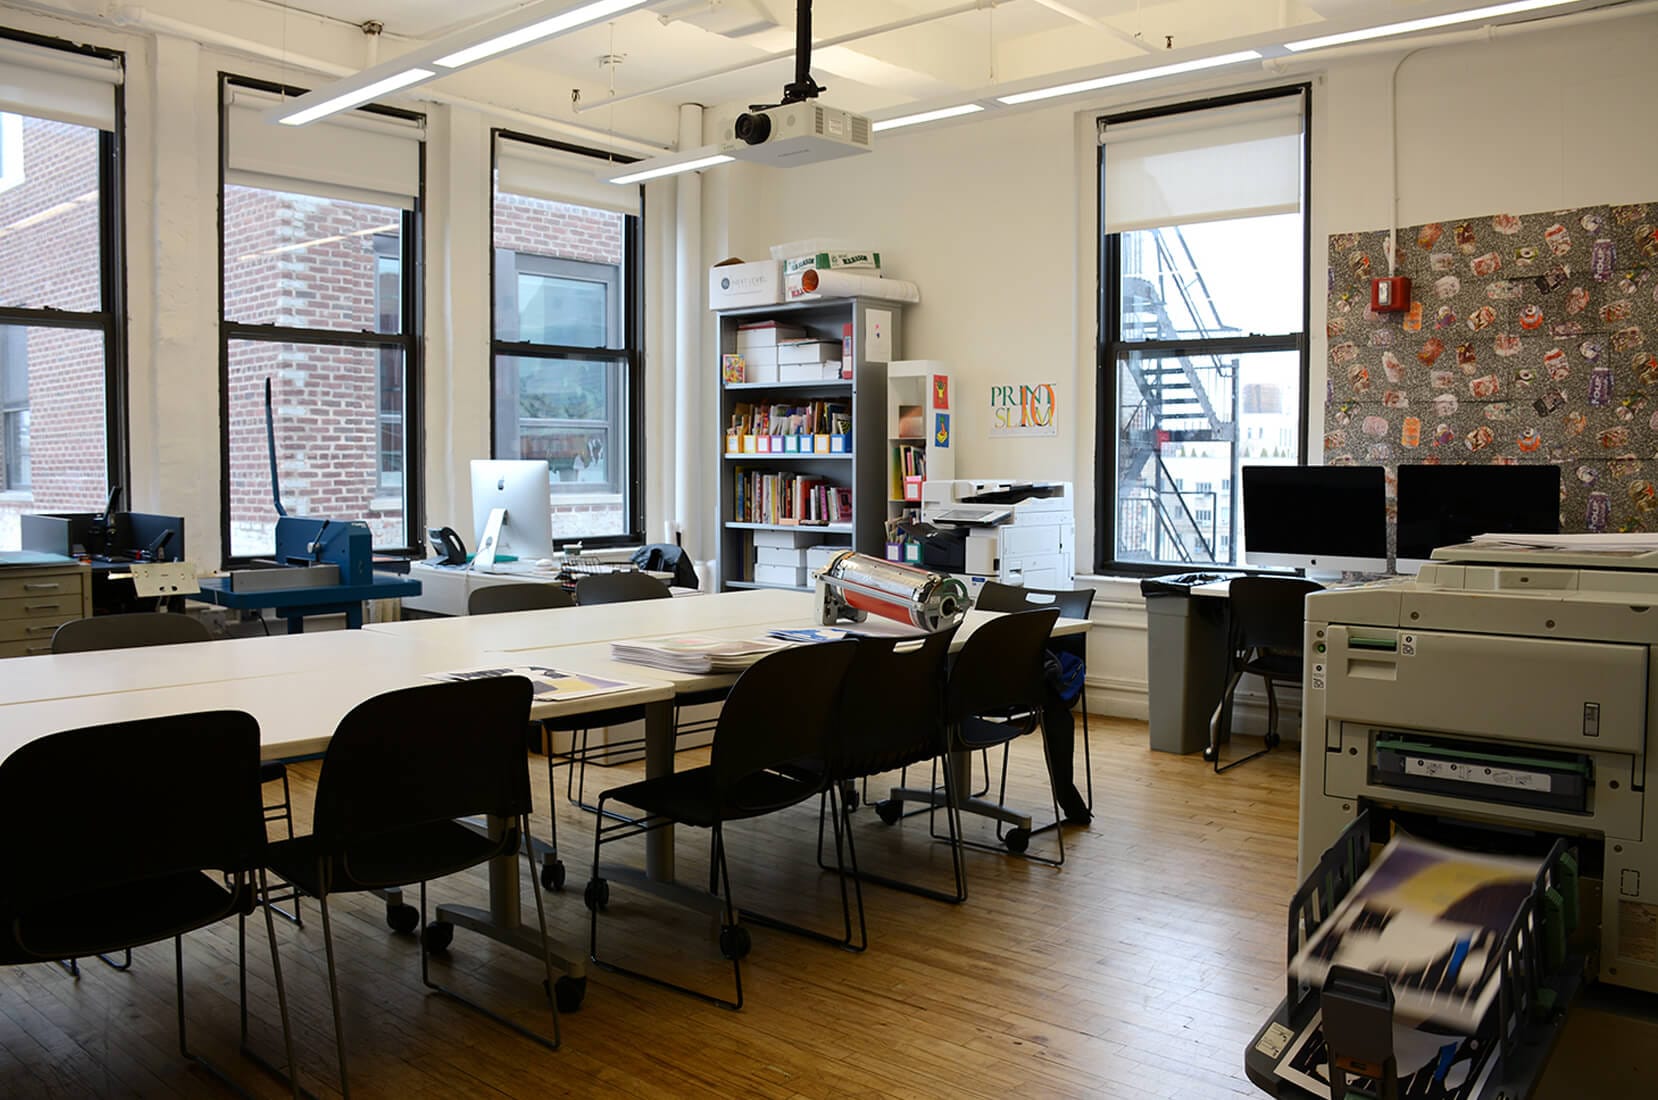 A photo of the Risolab as seen from the main entrance, showing one of the Risograph printers and the central table where students sit.